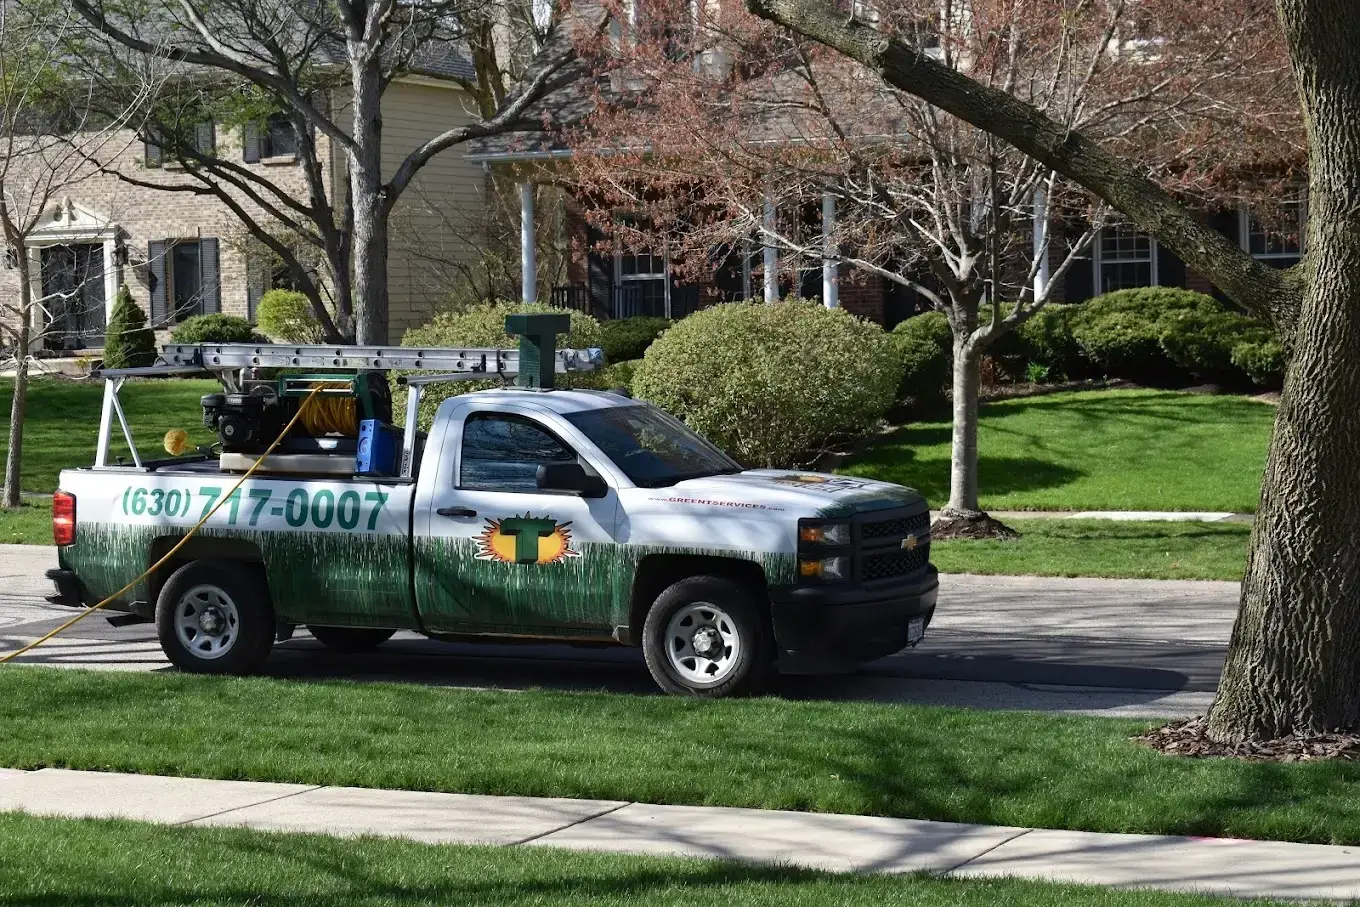 service truck of a home improvement business parked in a suburban area, ideal for home services marketing.